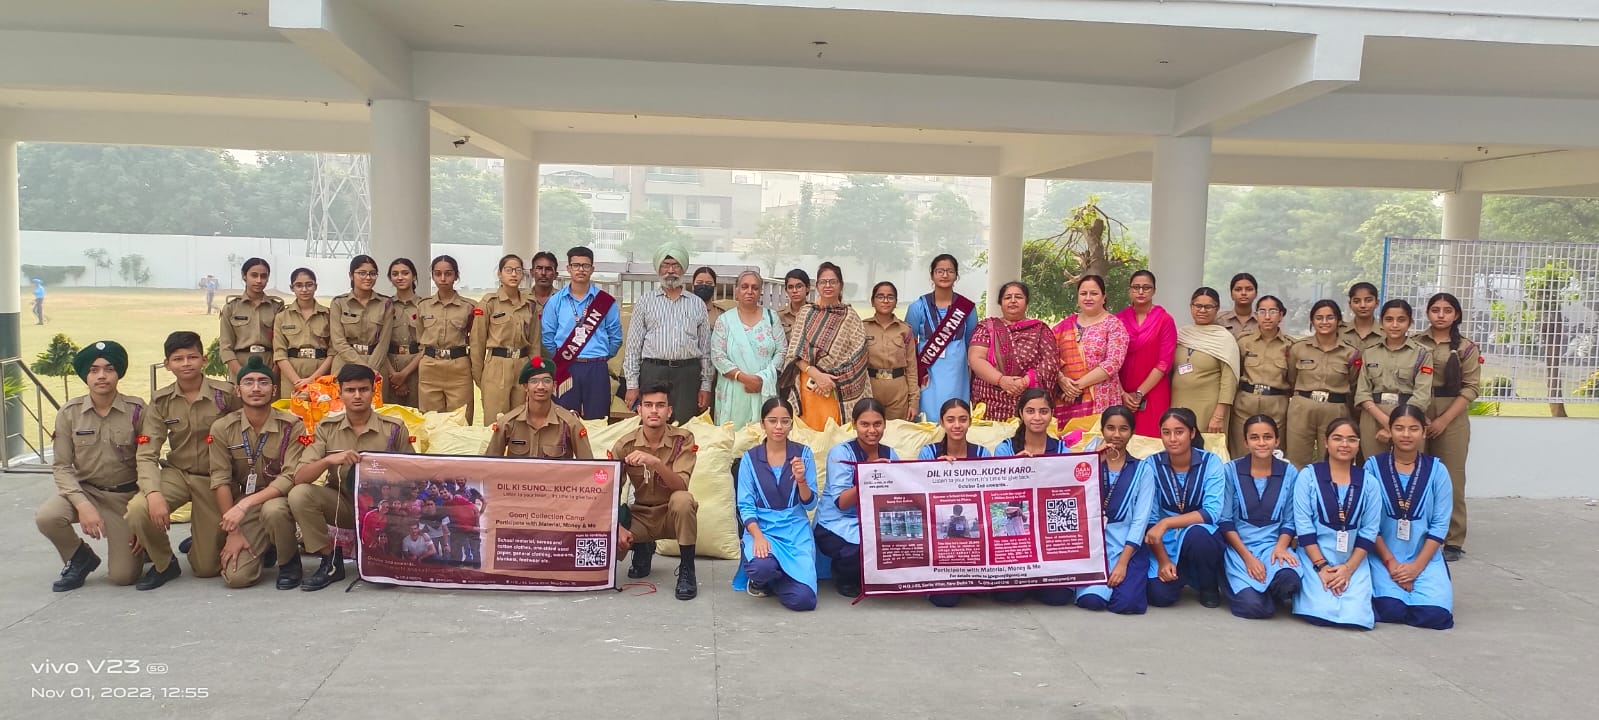 A Day of Charity celebrated in association with NGO - Goonj India